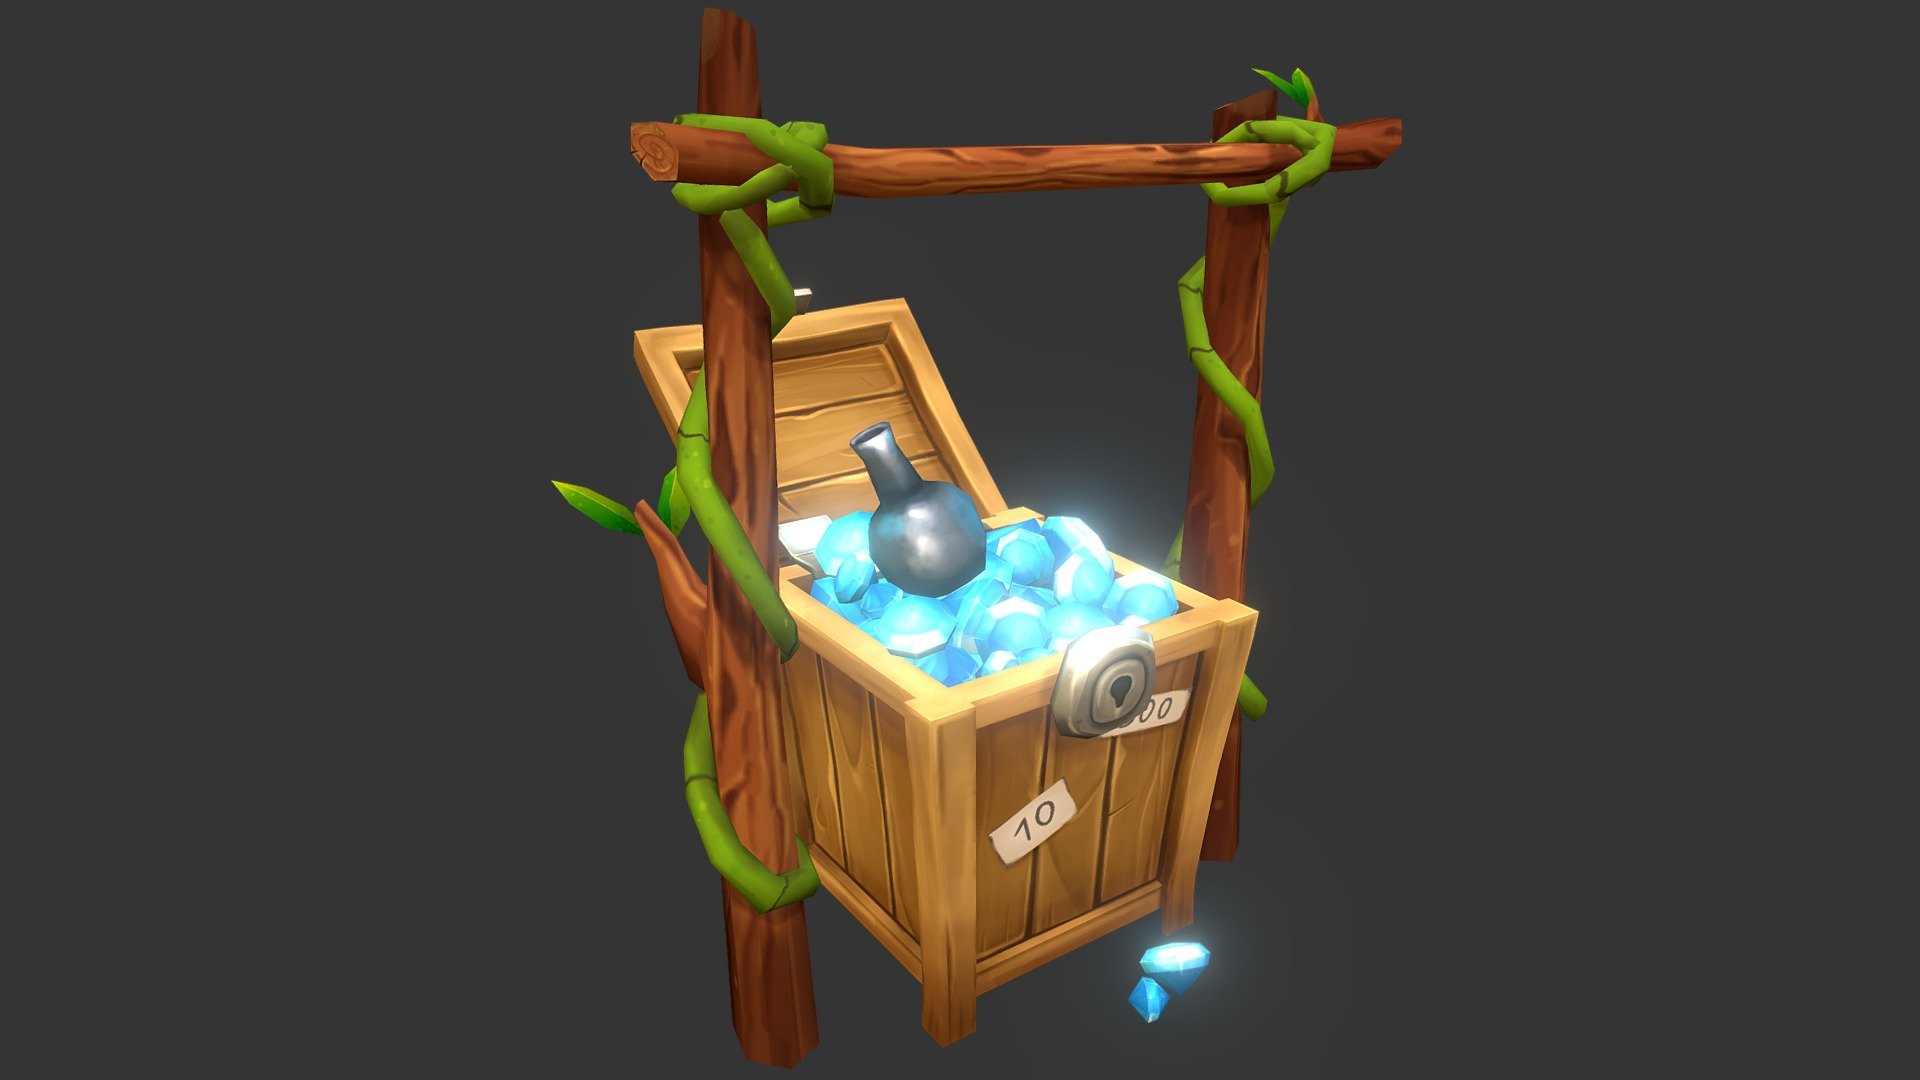 Chest full of diamonds, found in the jungle :)


Game Asset for an unreleased mobile game!

Concept Art by Laumii (https://www.artstation.com/laumii) - Jungle Treasure - 3D model by natapon 3d model